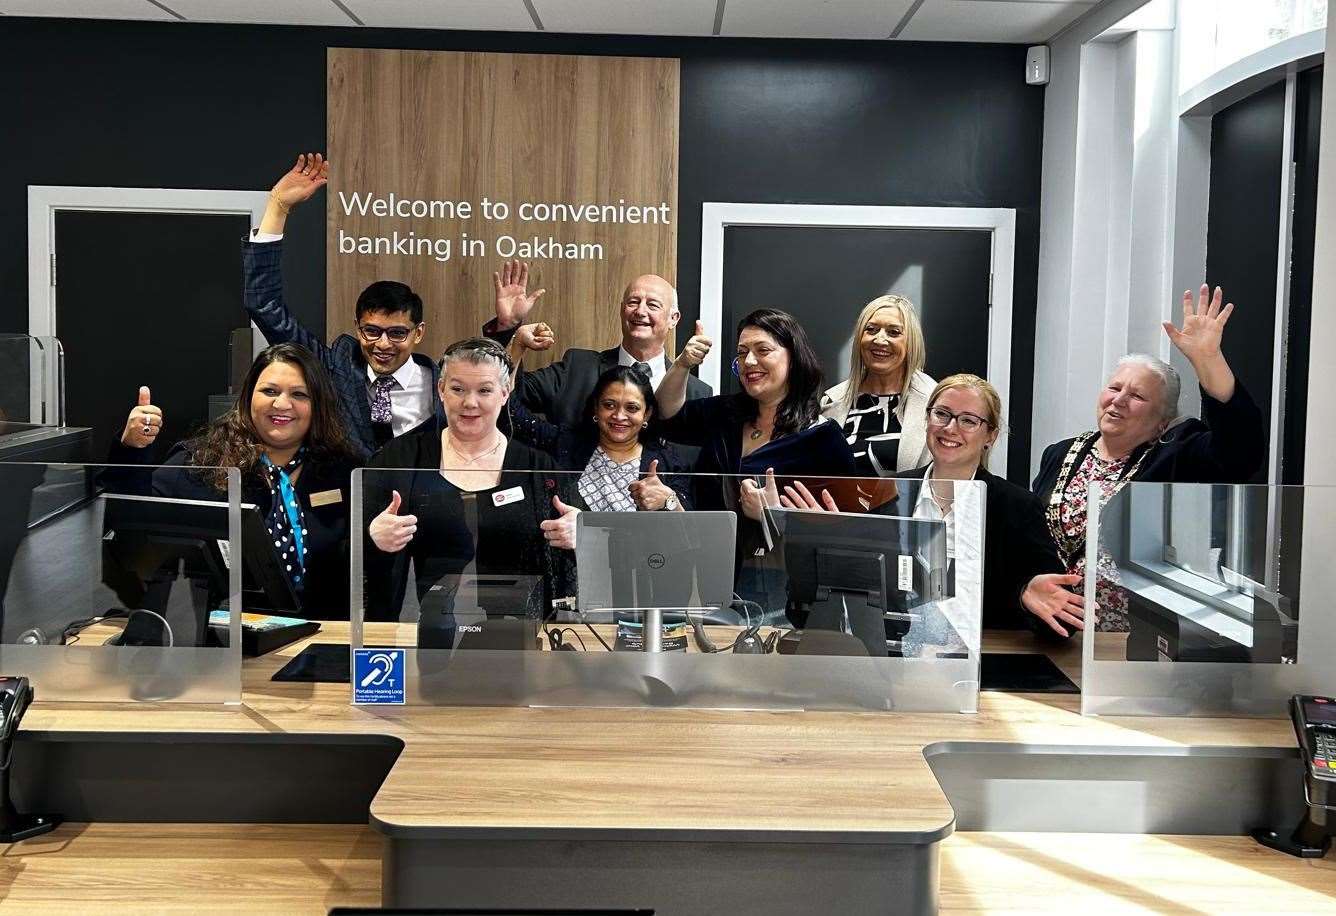 The new Banking Hub opens in Oakham